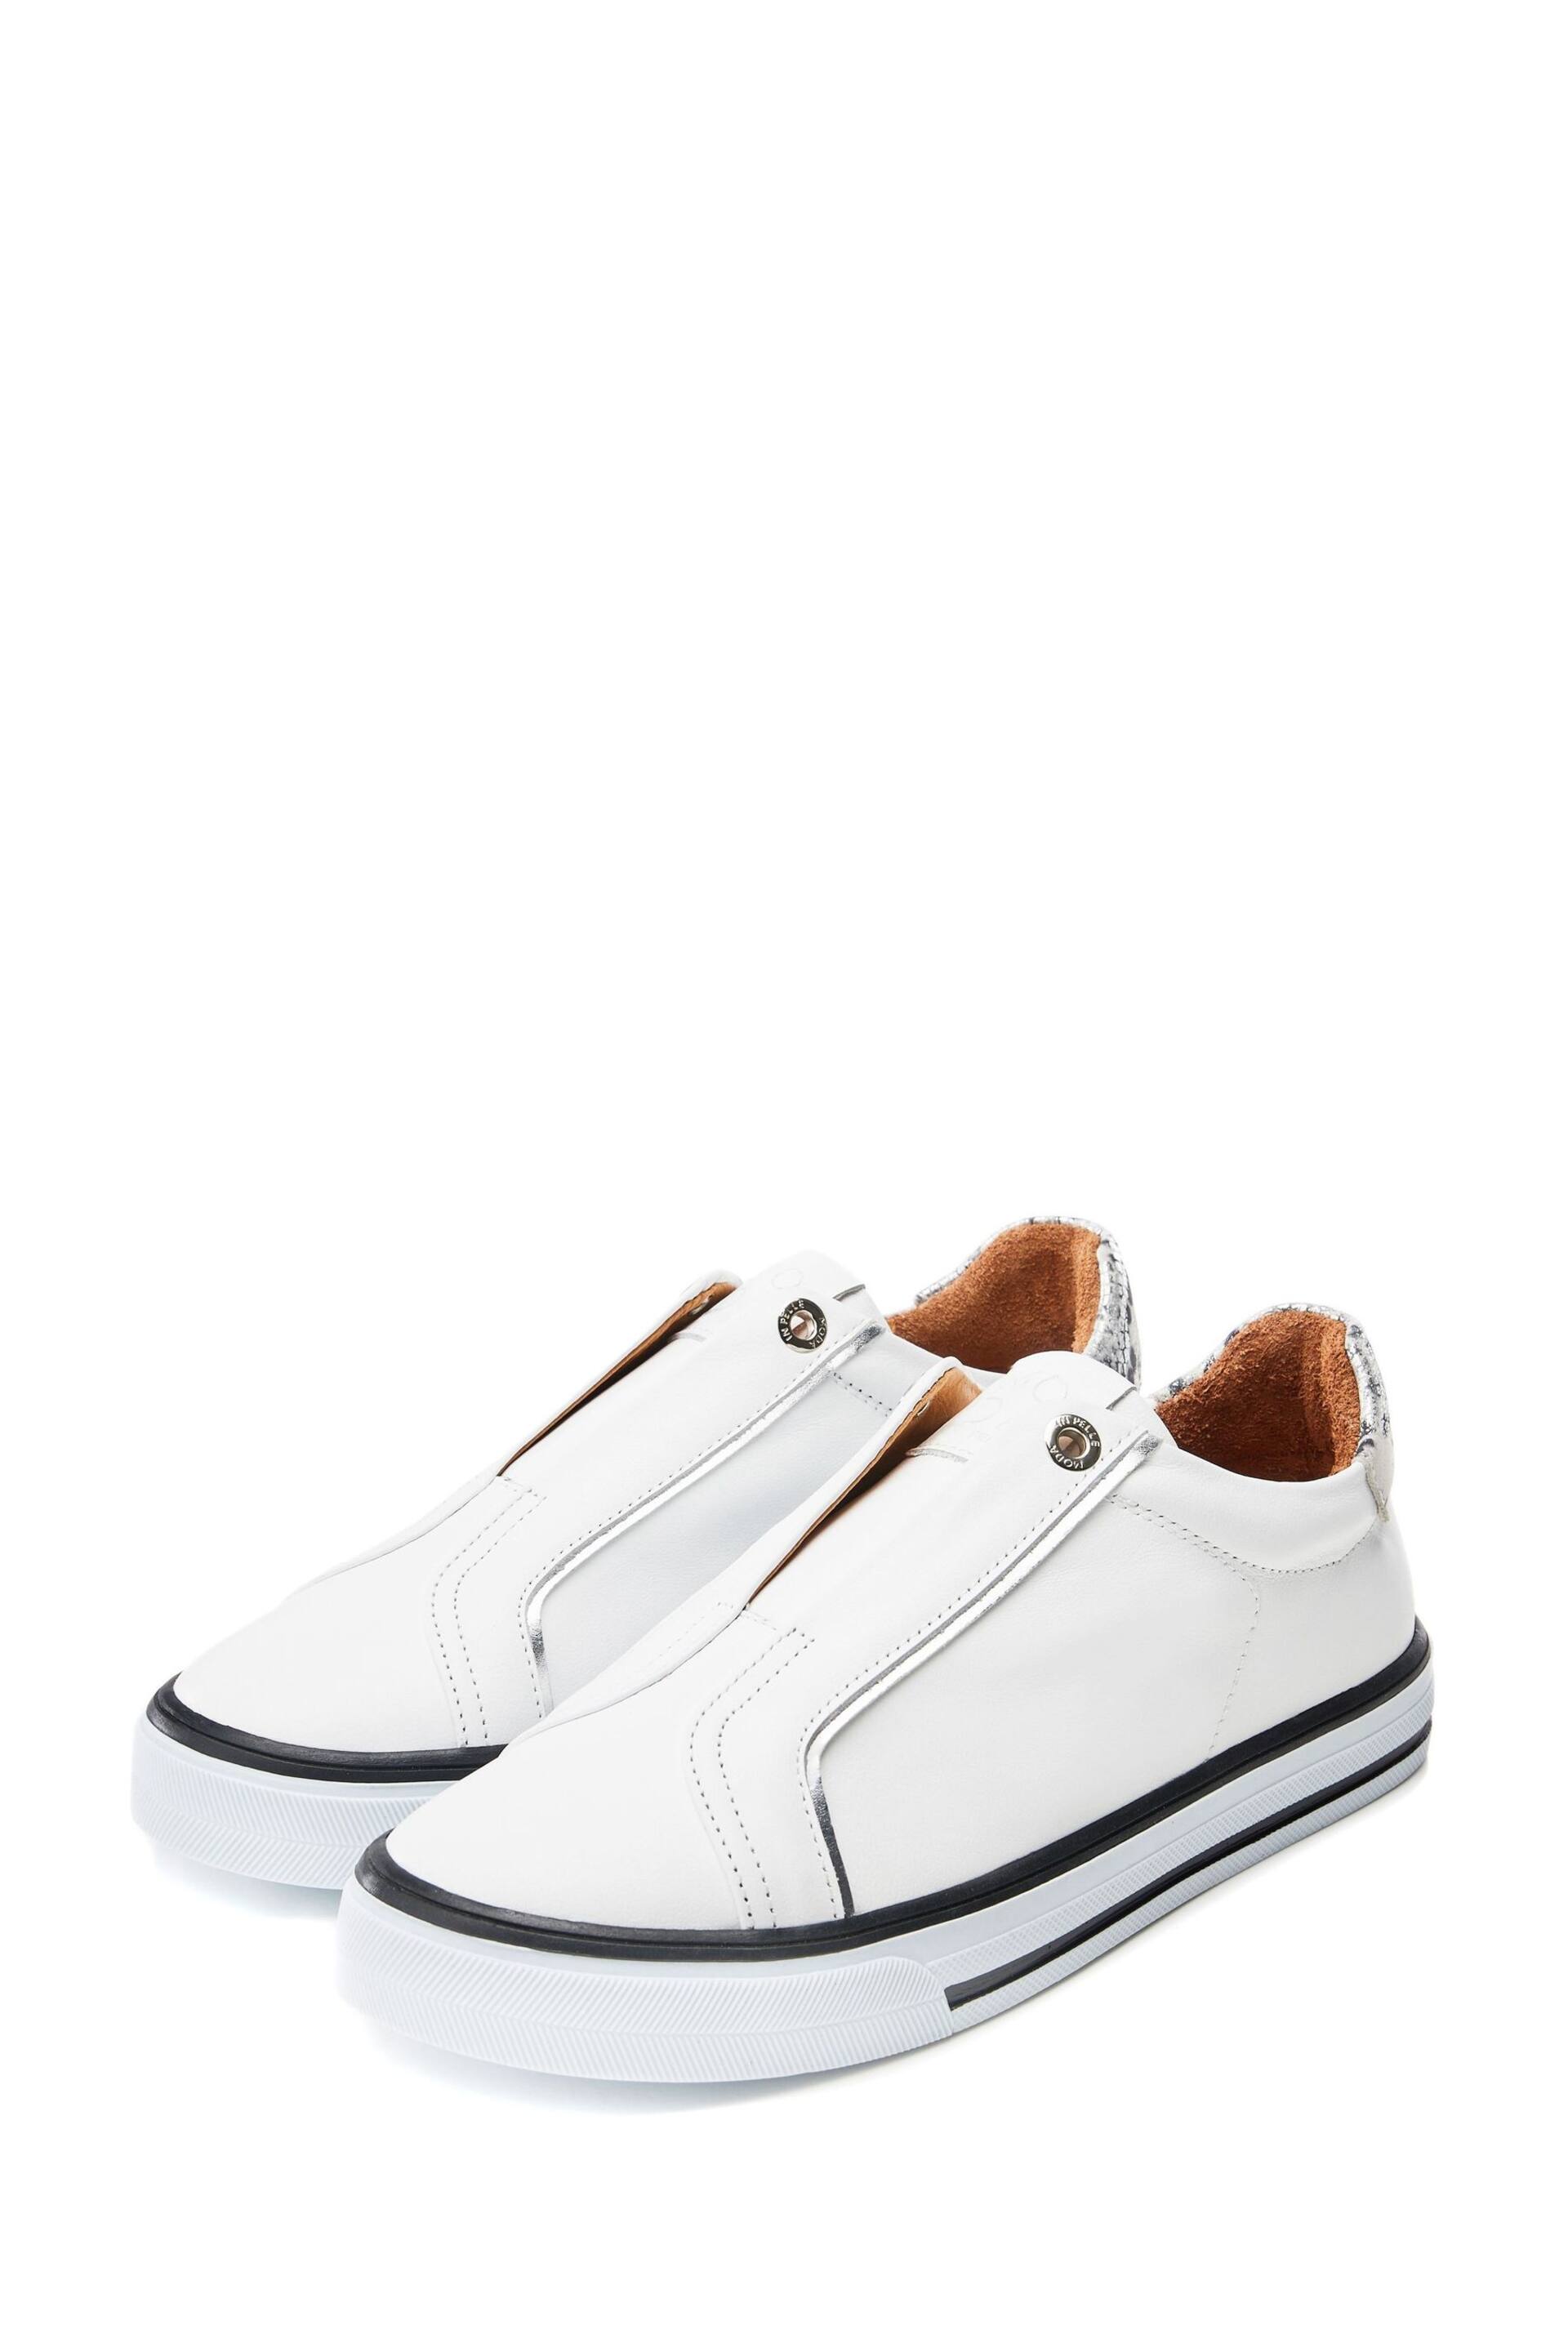 Moda in Pelle Bennii Elastic White Slip-Ons With Foxing Sole - Image 1 of 4